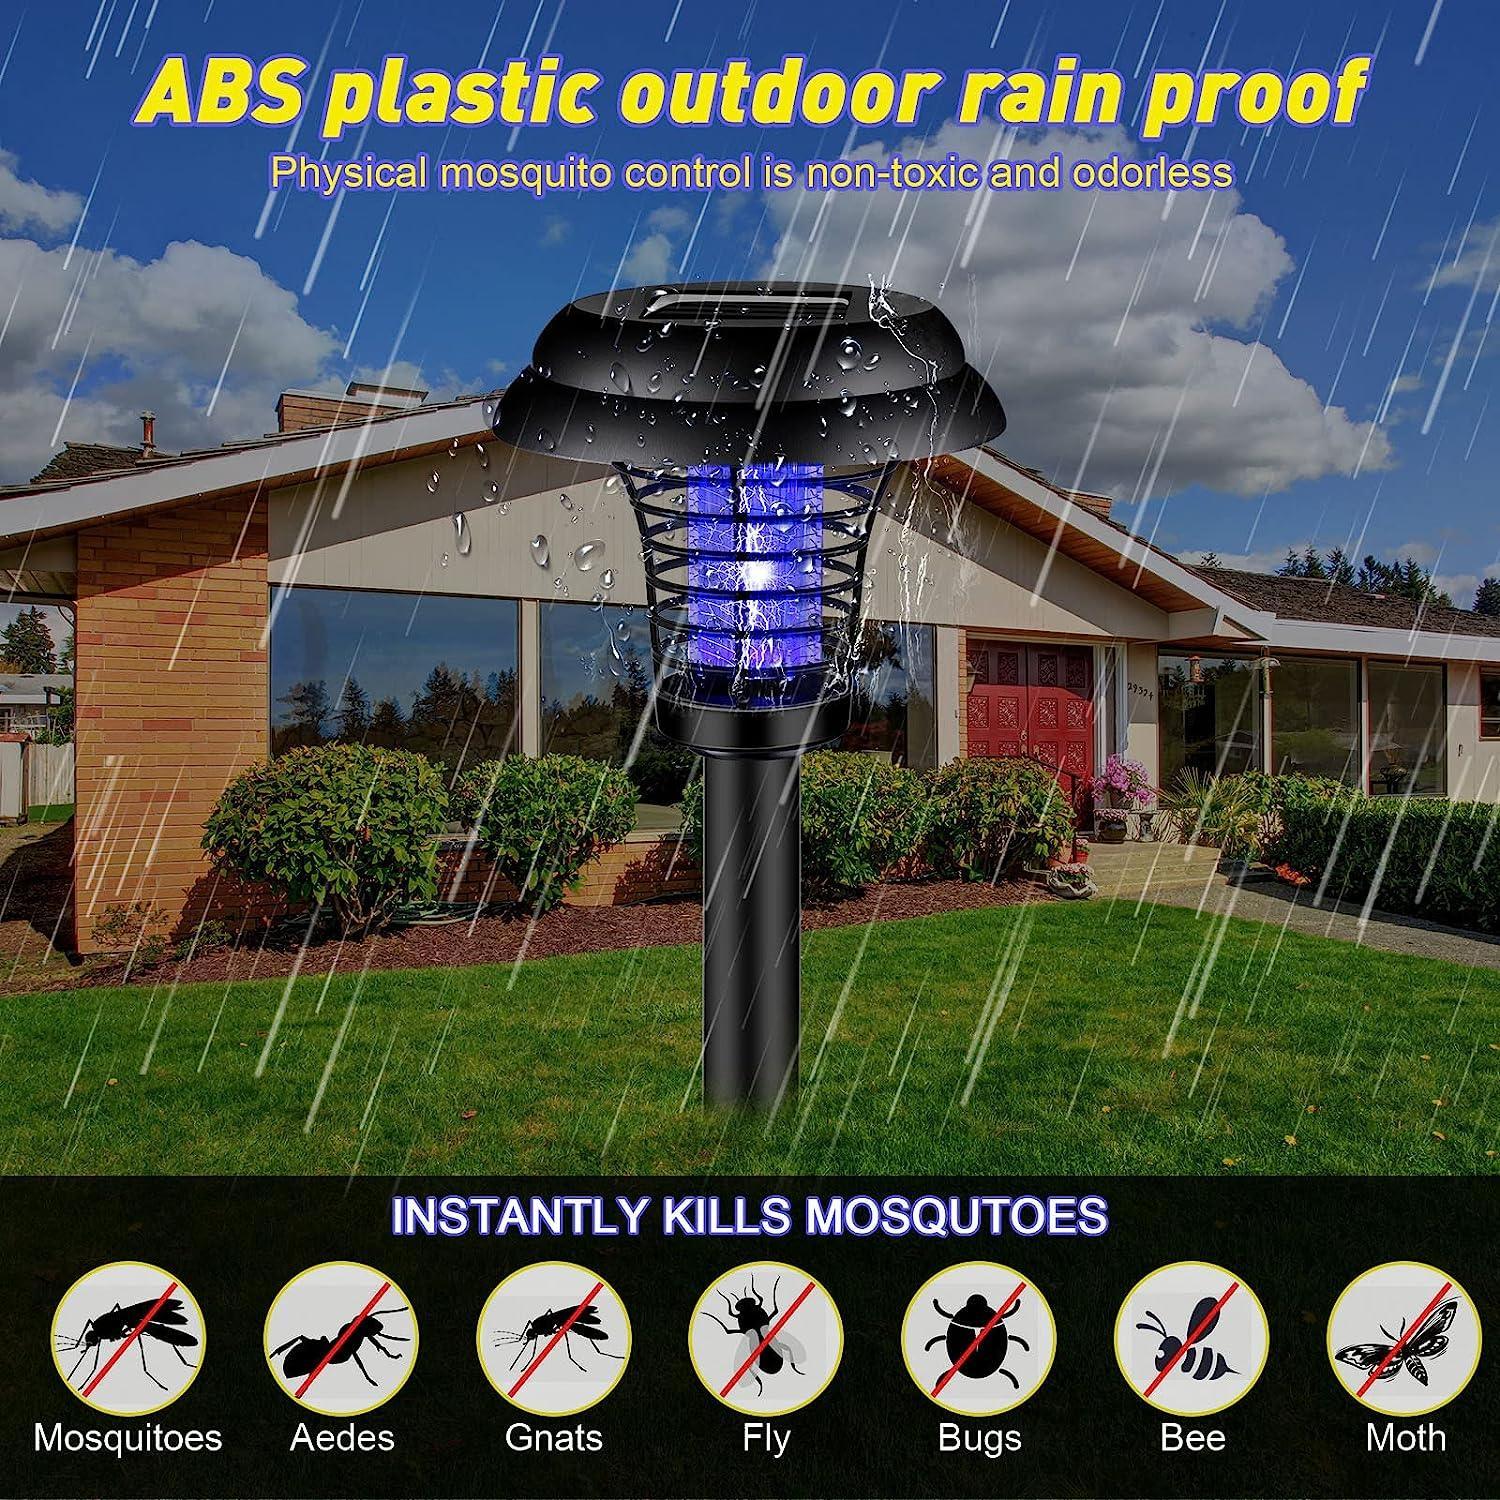 LazyPest InGround™4 pack Eliminate Bugs Instantly With Solar-Powered Bug Zapper, Outdoor Lights - Indoor & Outdoor Use! Solar Mosquito Killer Light - Lazy Pro